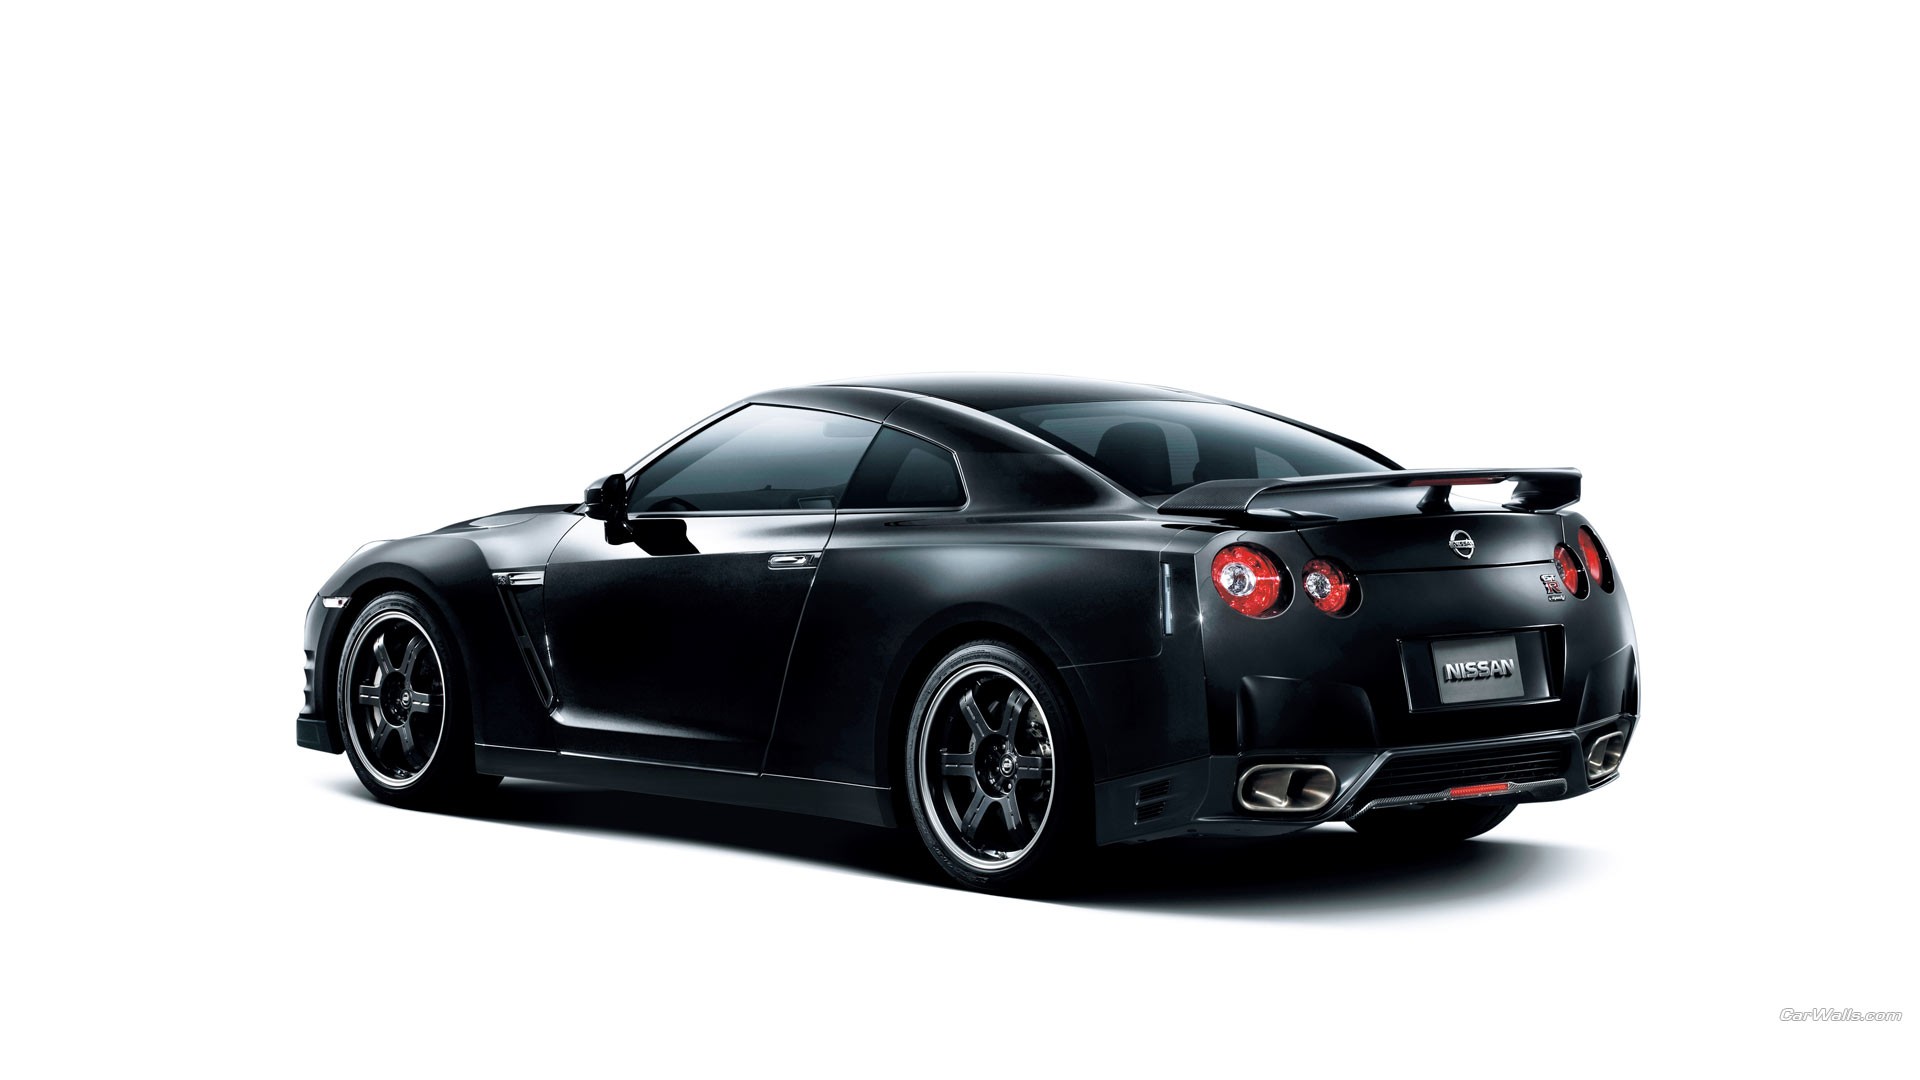 General 1920x1080 car Nissan black cars vehicle simple background Nissan GT-R Japanese cars